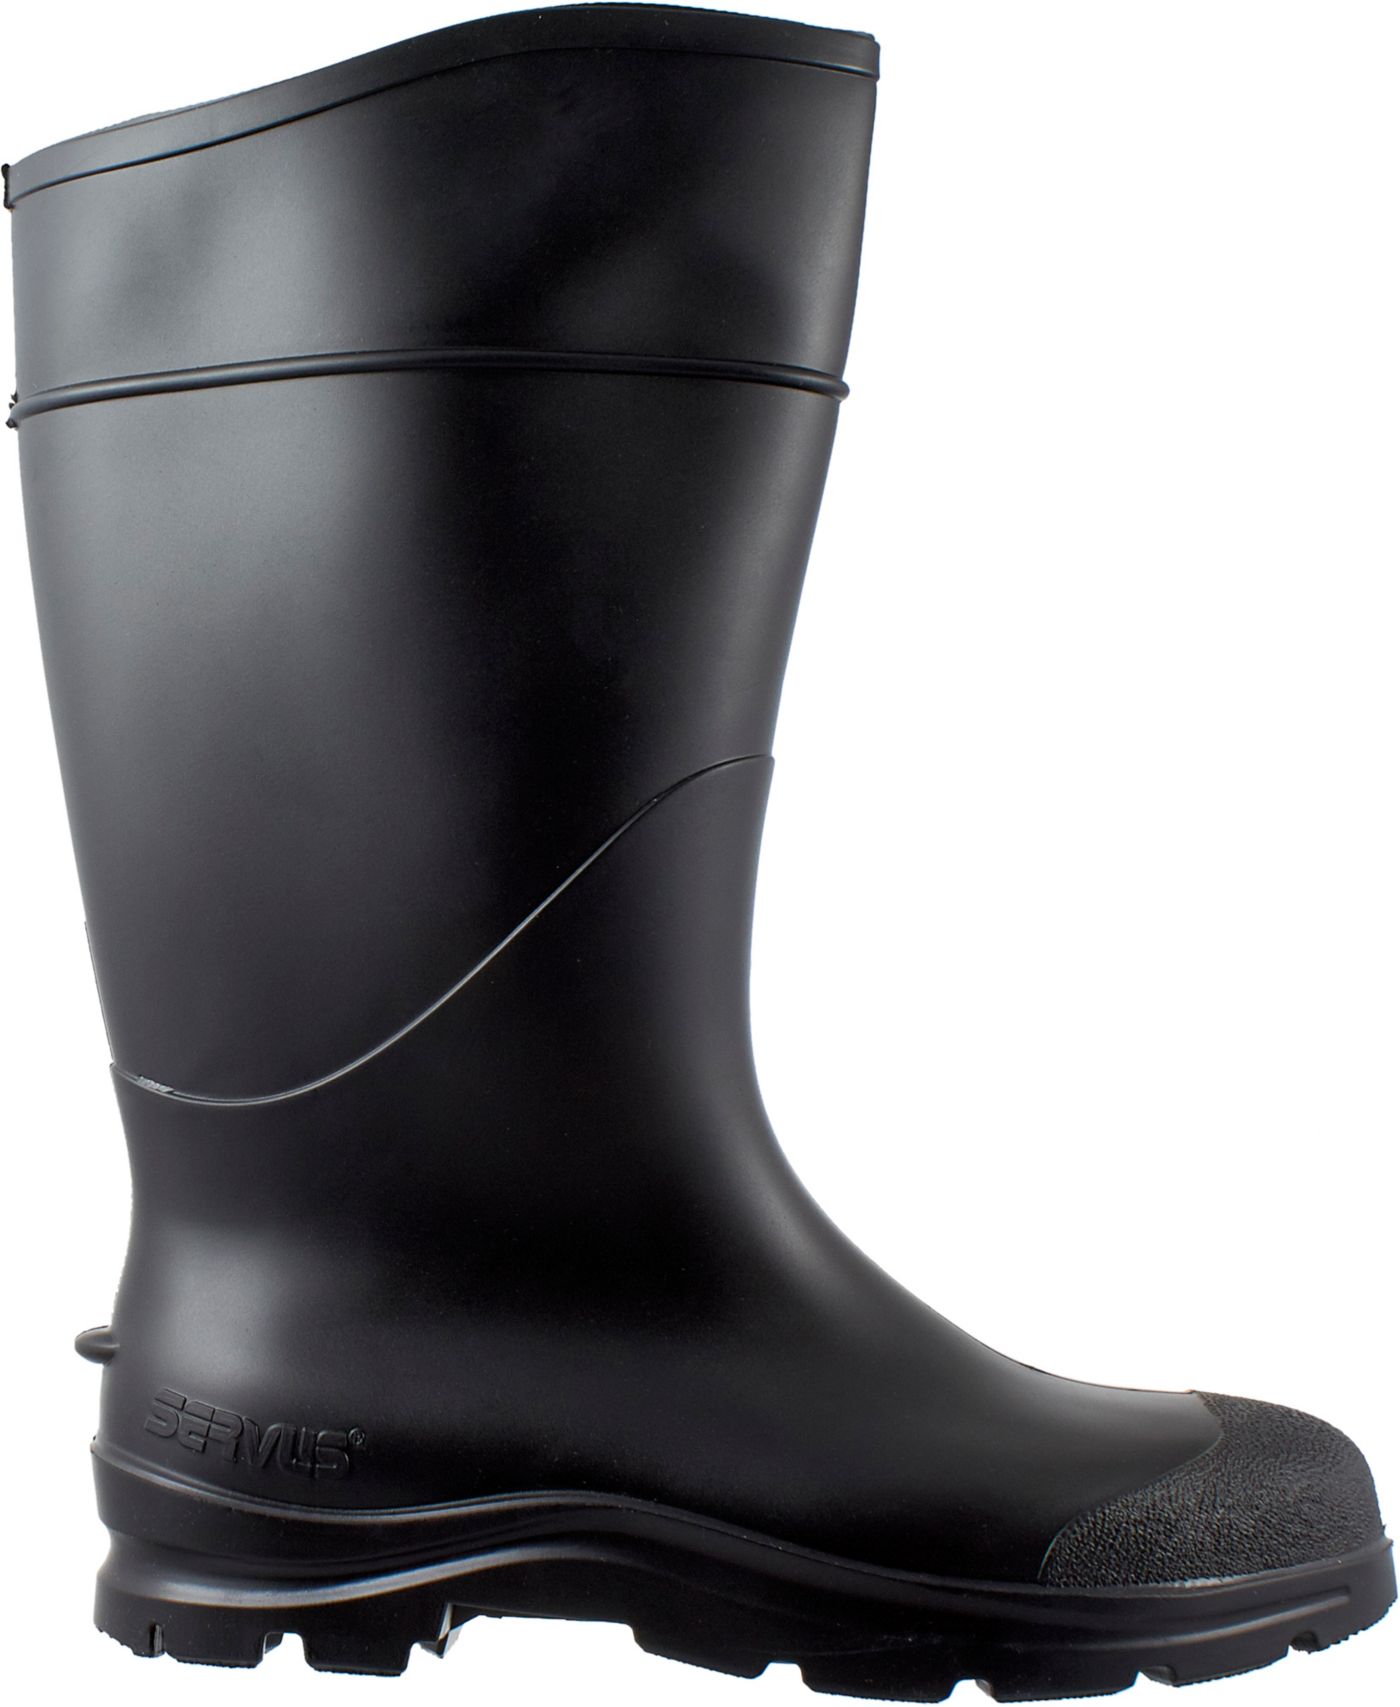 rubber mens boots